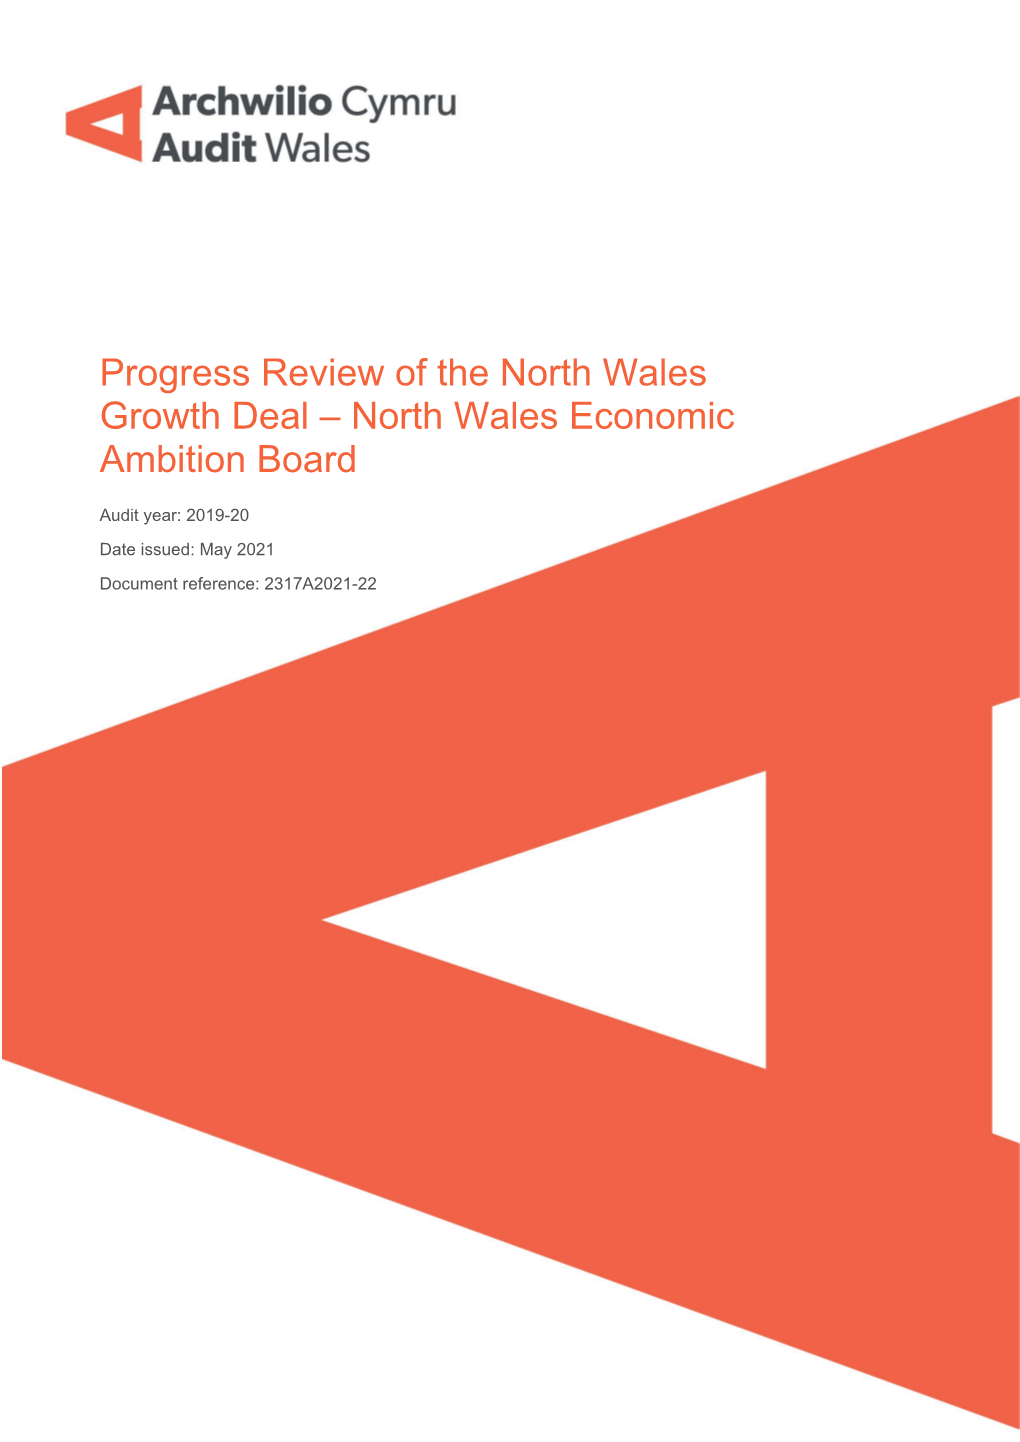 North Wales Economic Ambition Board – Progress Review of The